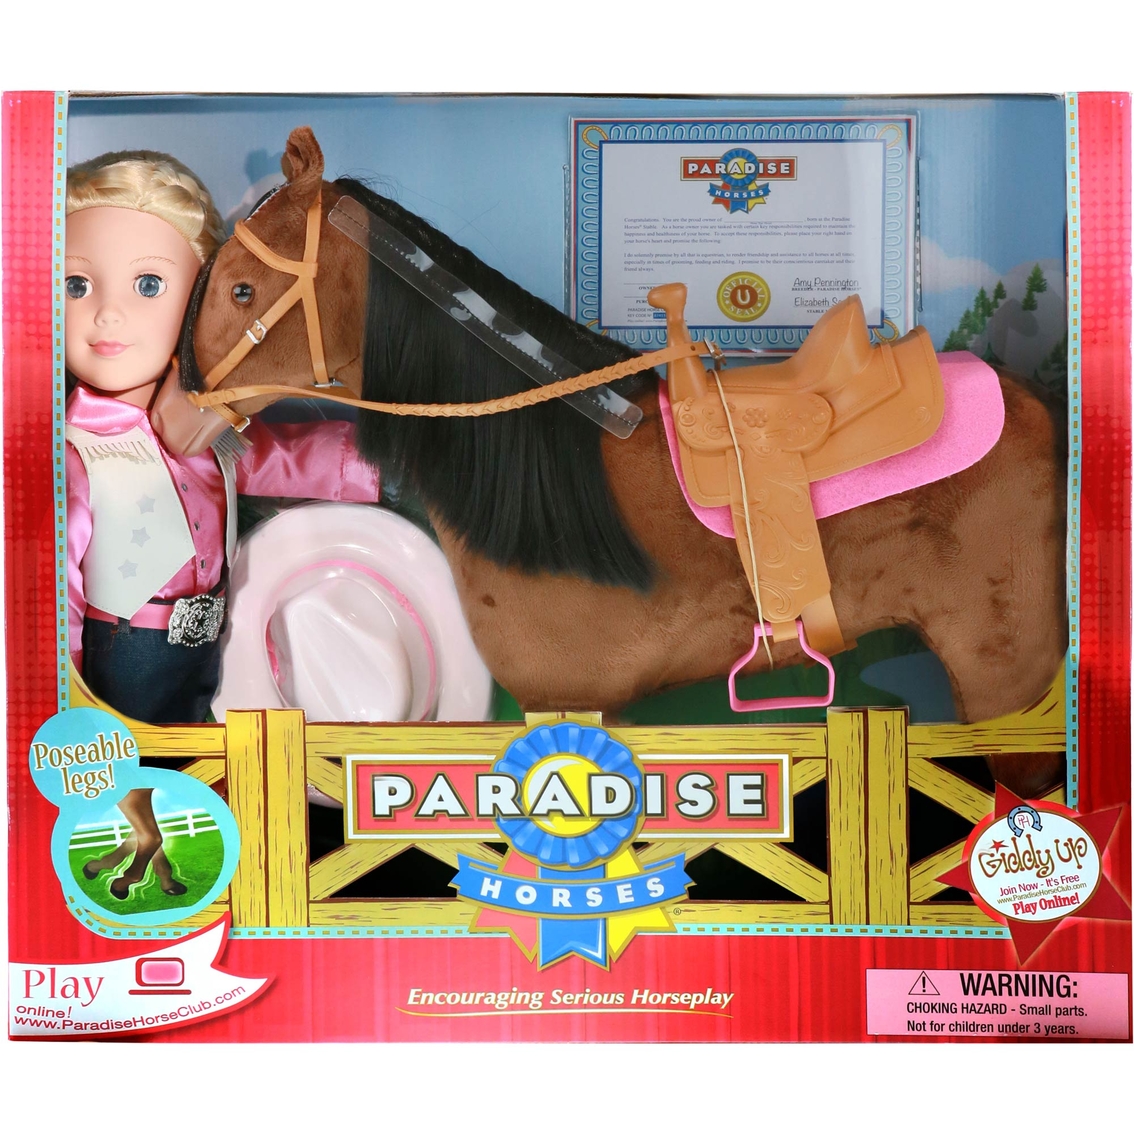 American Paradise horses 18" doll brown white mane & tail legs move girl toy 